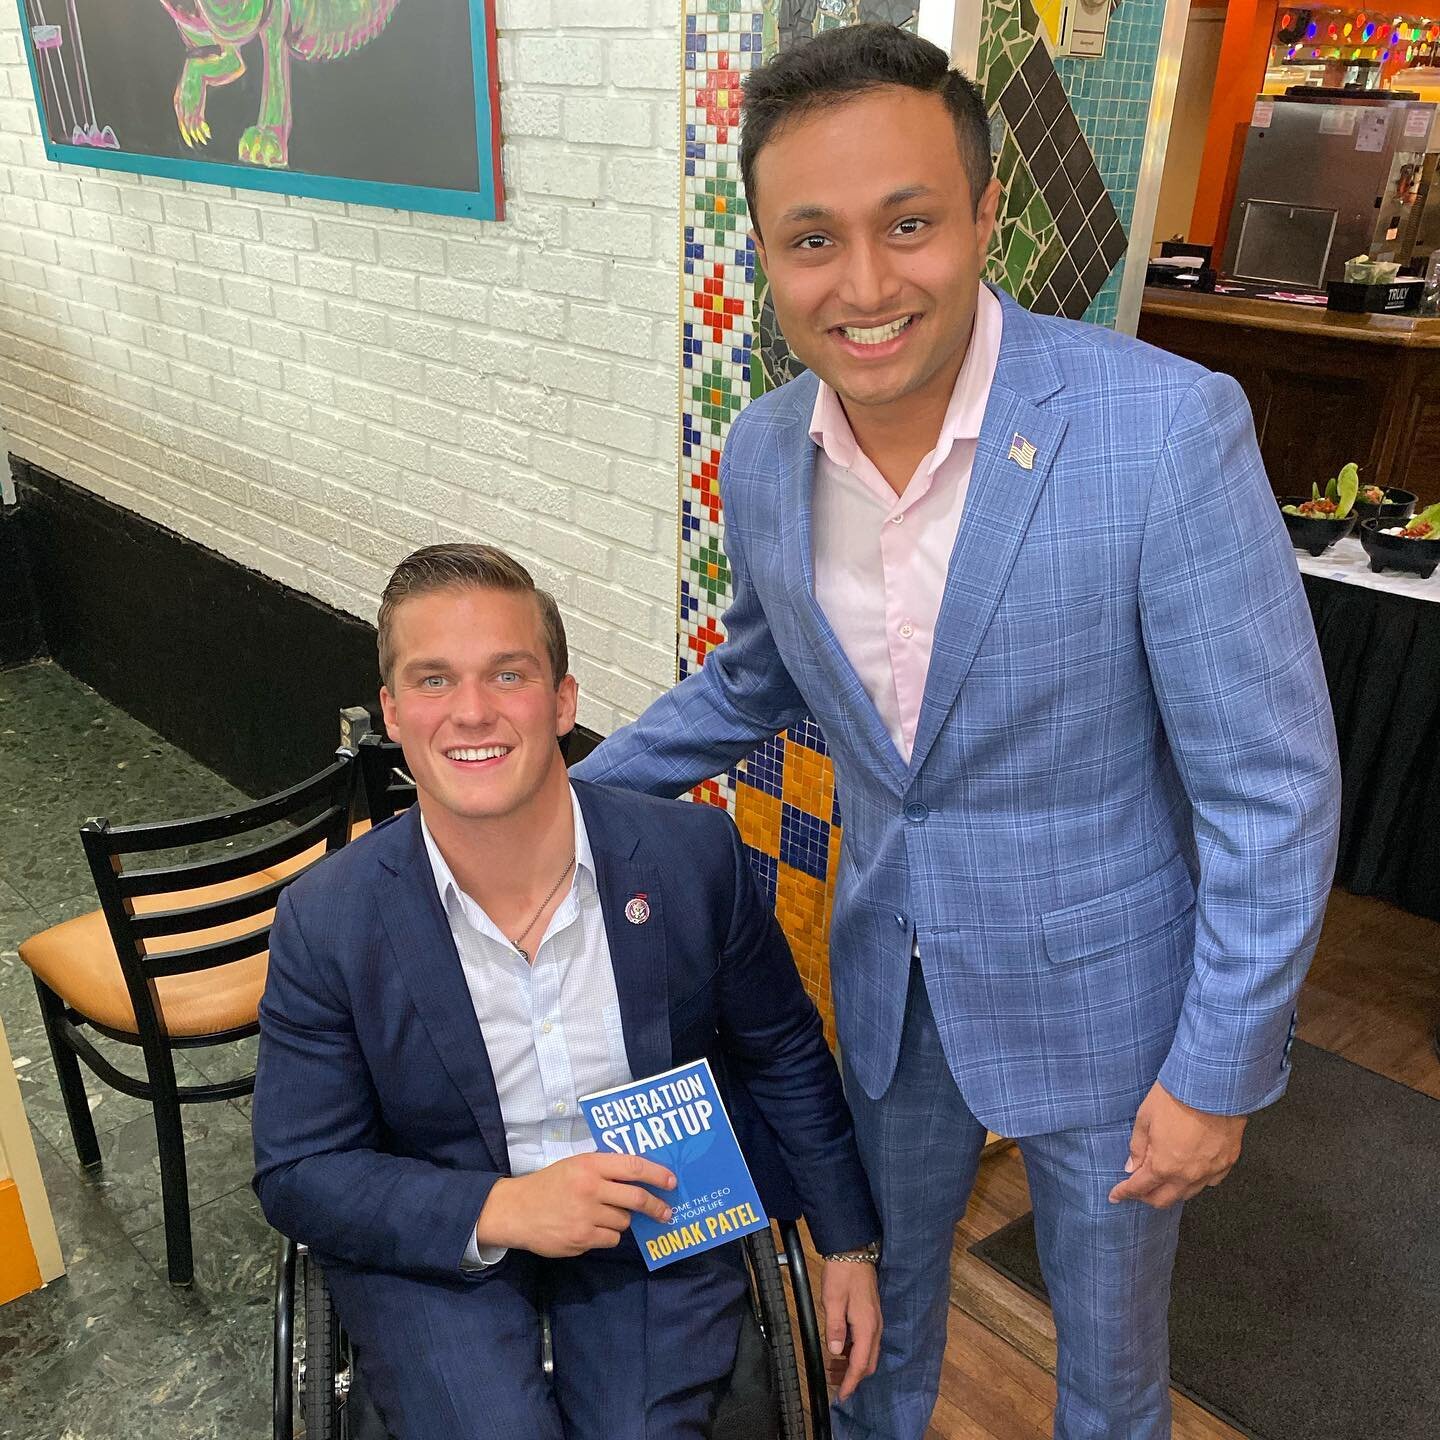 The American Dream 🇺🇸 Great seeing my friend @madisoncawthorn 🤝 (book link in my bio)